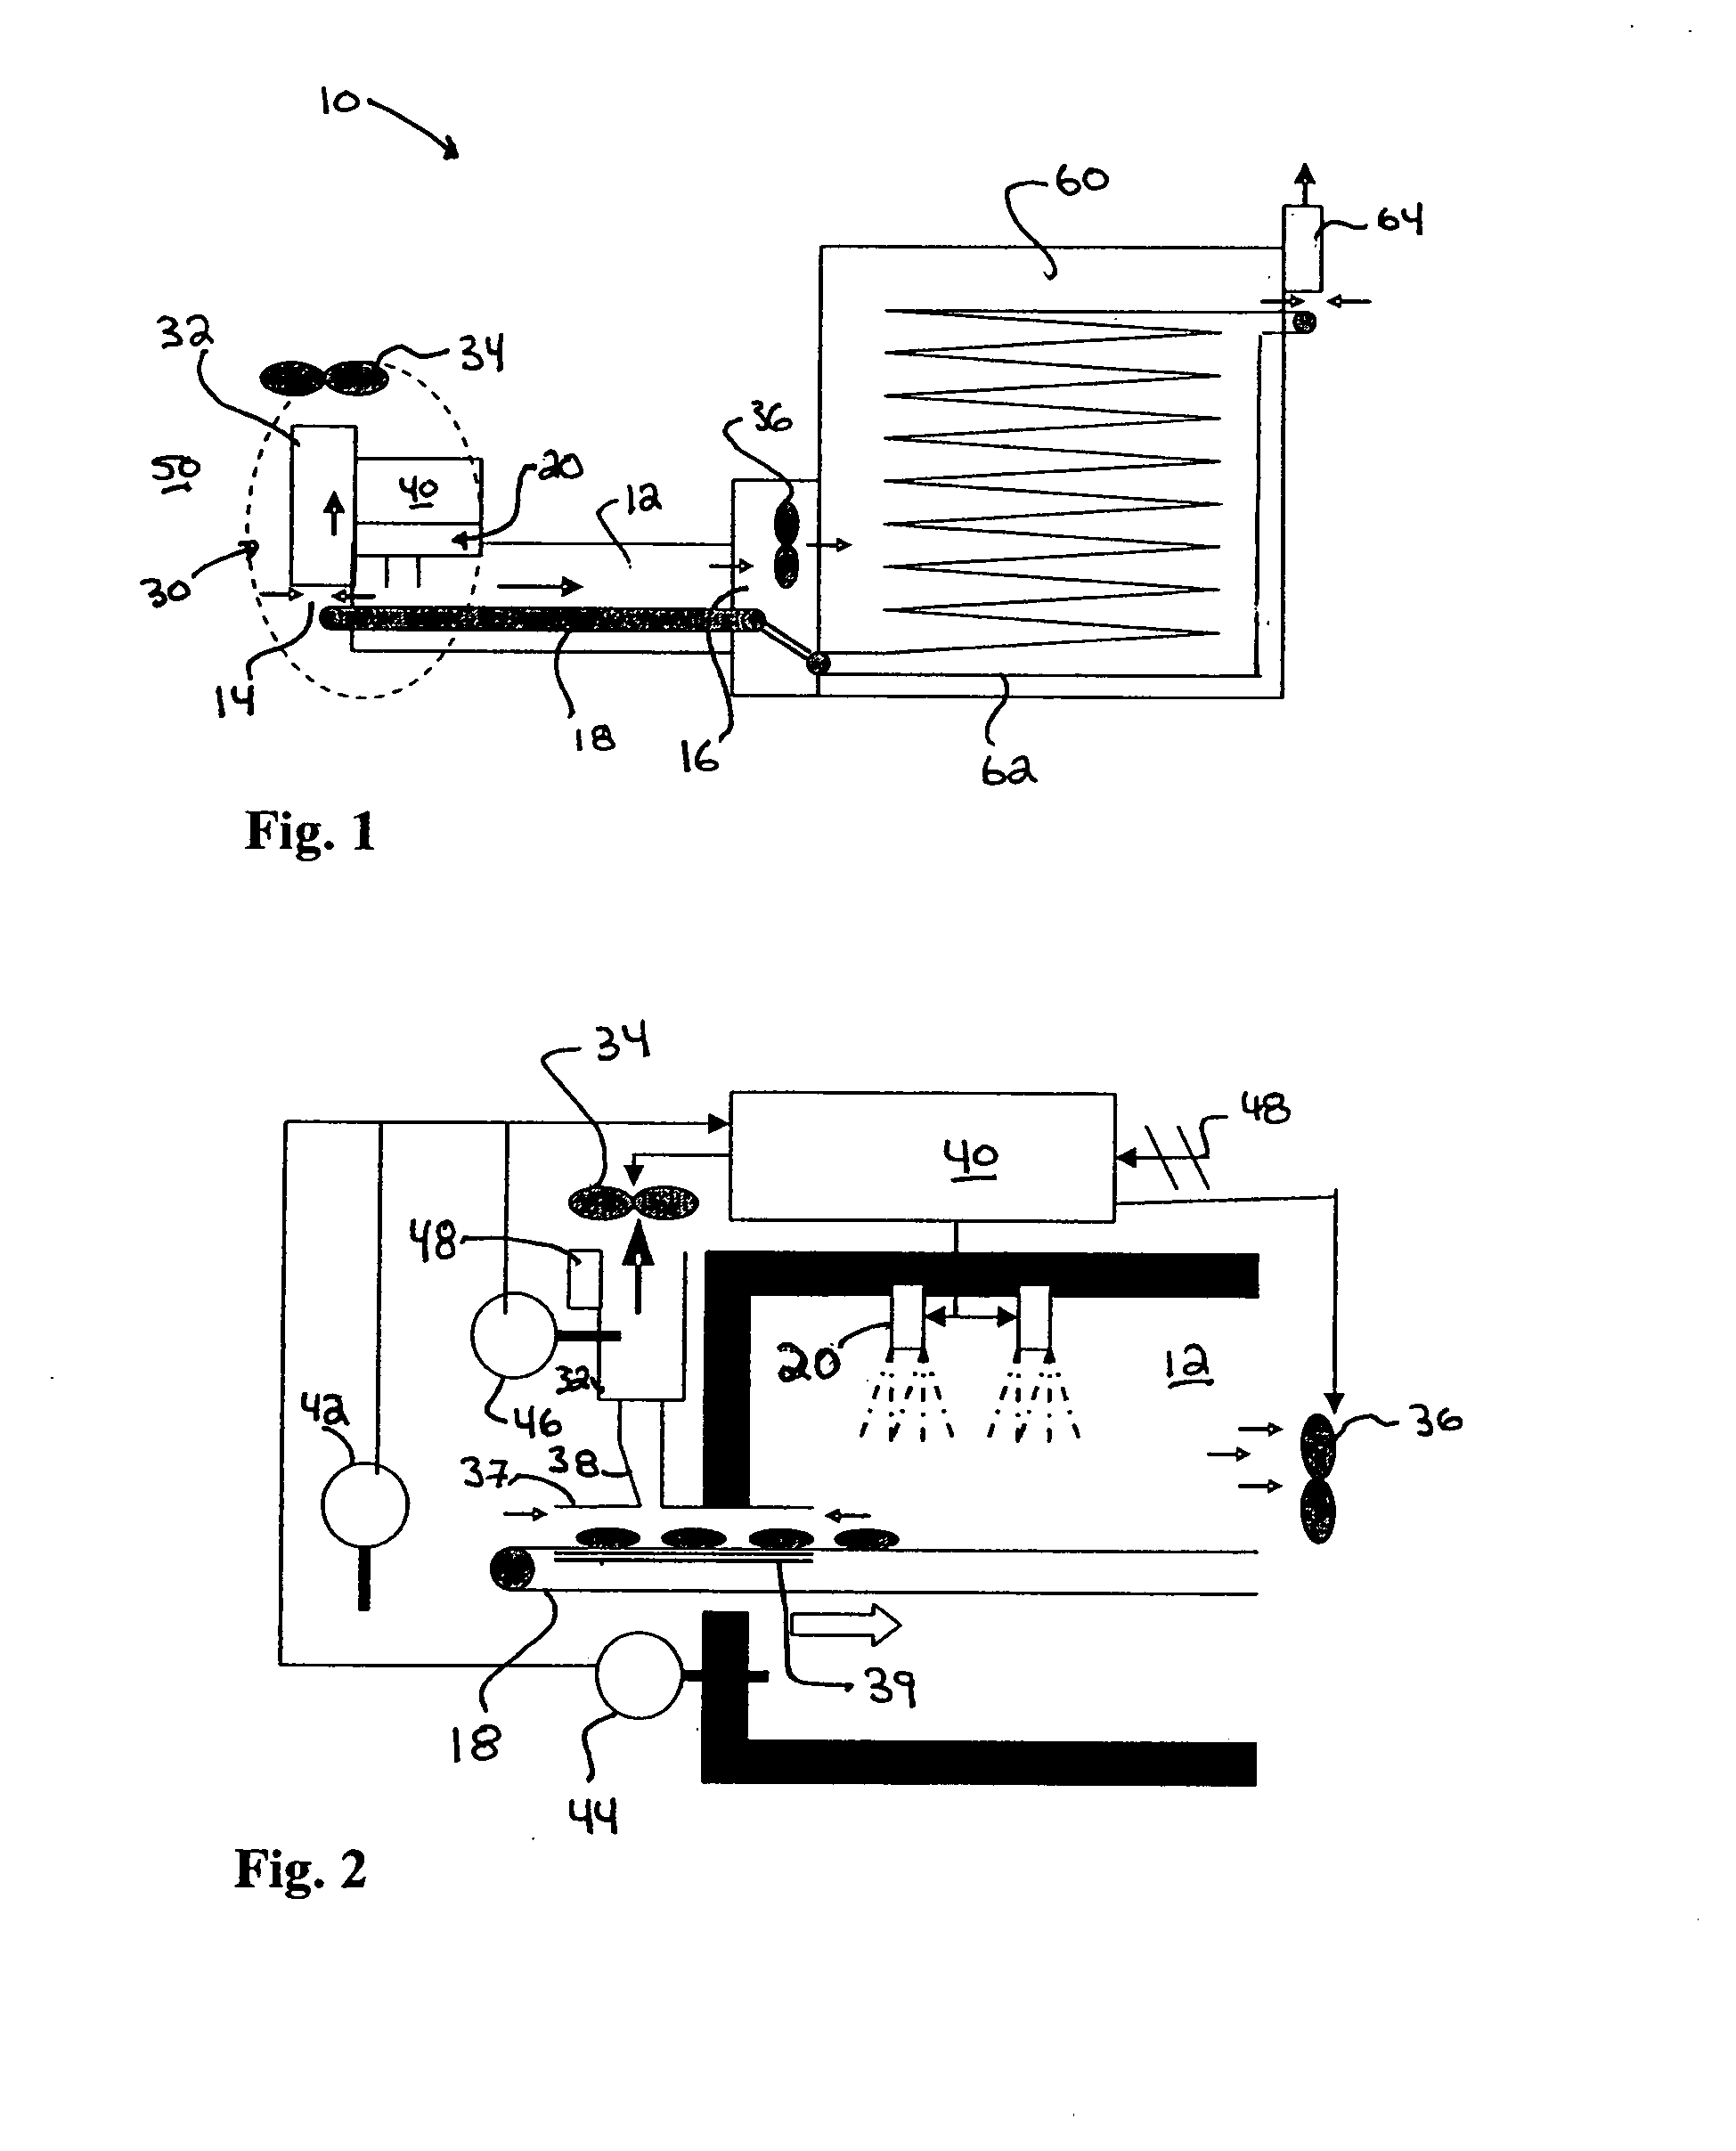 System and method for vapor control in cryogenic freezers